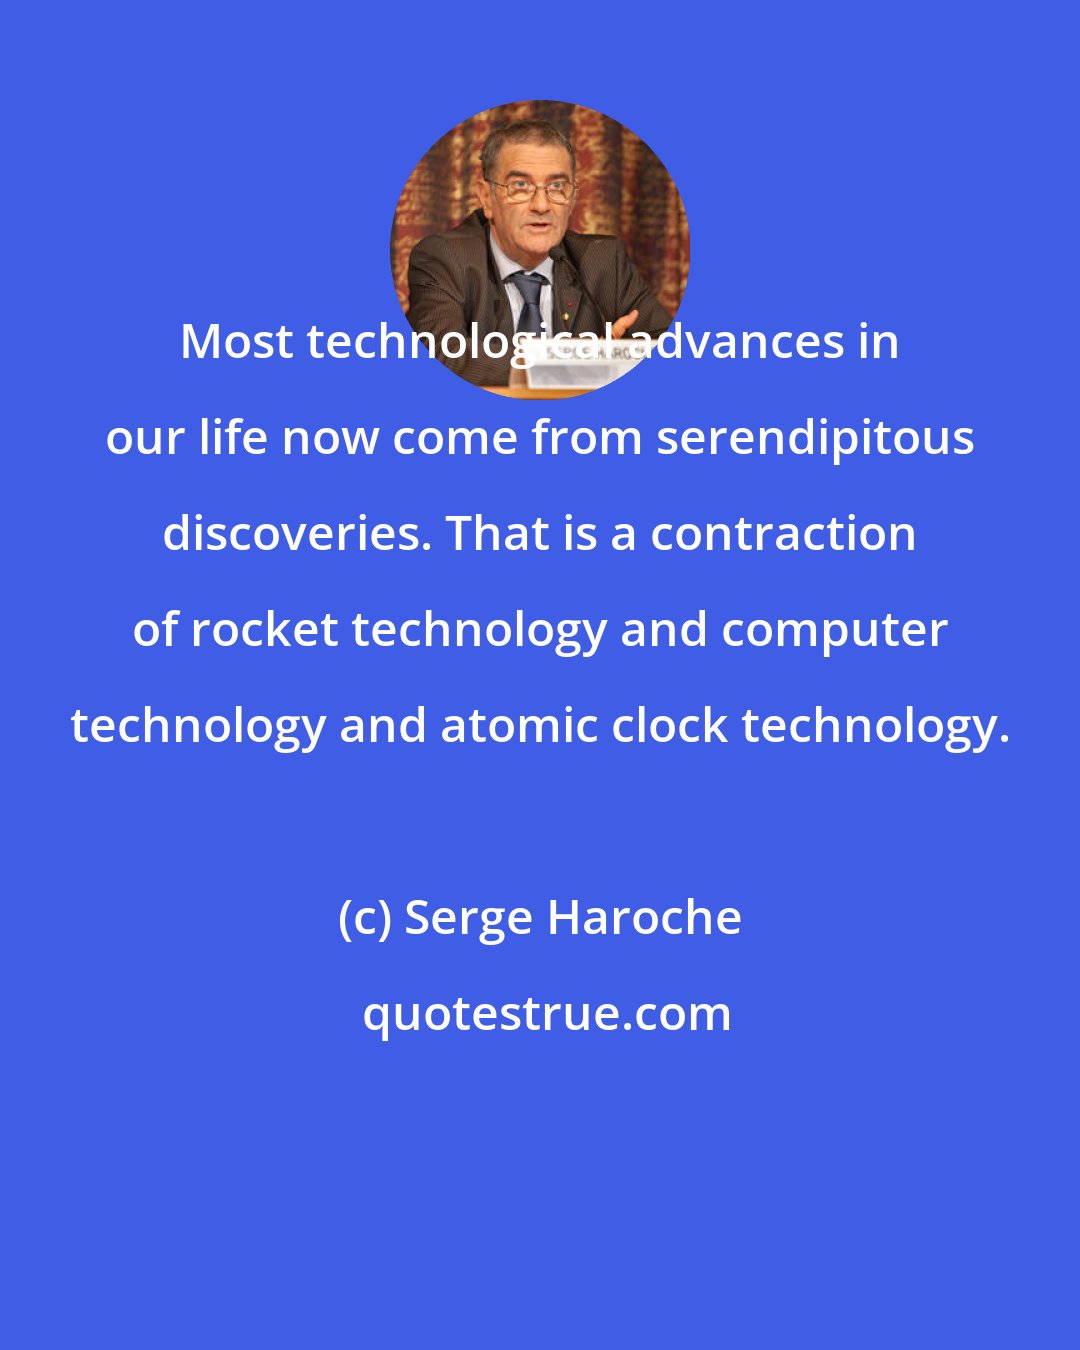 Serge Haroche: Most technological advances in our life now come from serendipitous discoveries. That is a contraction of rocket technology and computer technology and atomic clock technology.